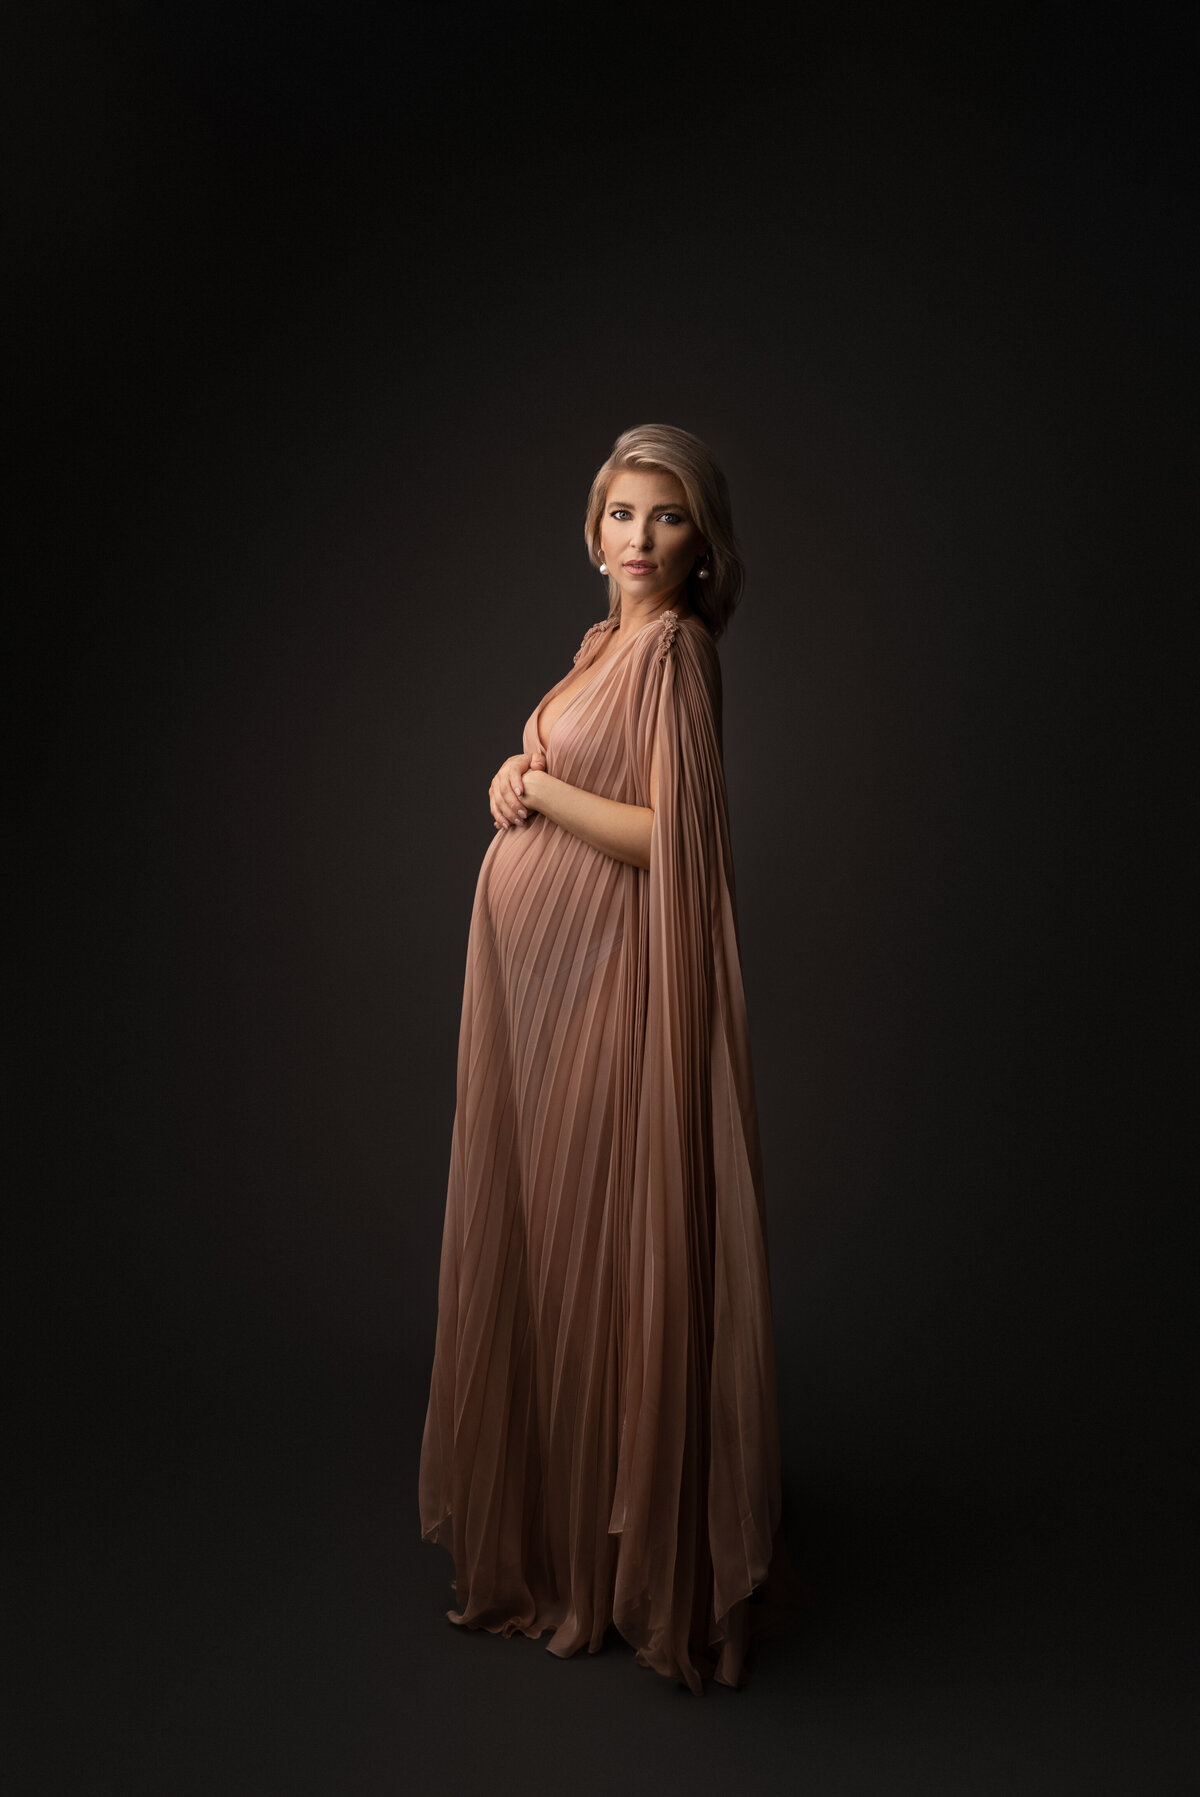 Woman poses for fine art maternity photos with Philadelphia's best maternity photographer Katie Marshall. Woman in a long dusty rose maternity photoshoot gown with floor-length caped sleeves stands side profile to the camera. Both of her hands are resting atop of her bump. She is looking over her shoulder intently at the camera. Light envelops the left side her body is facing, her back side shadowed creating depth to the image.